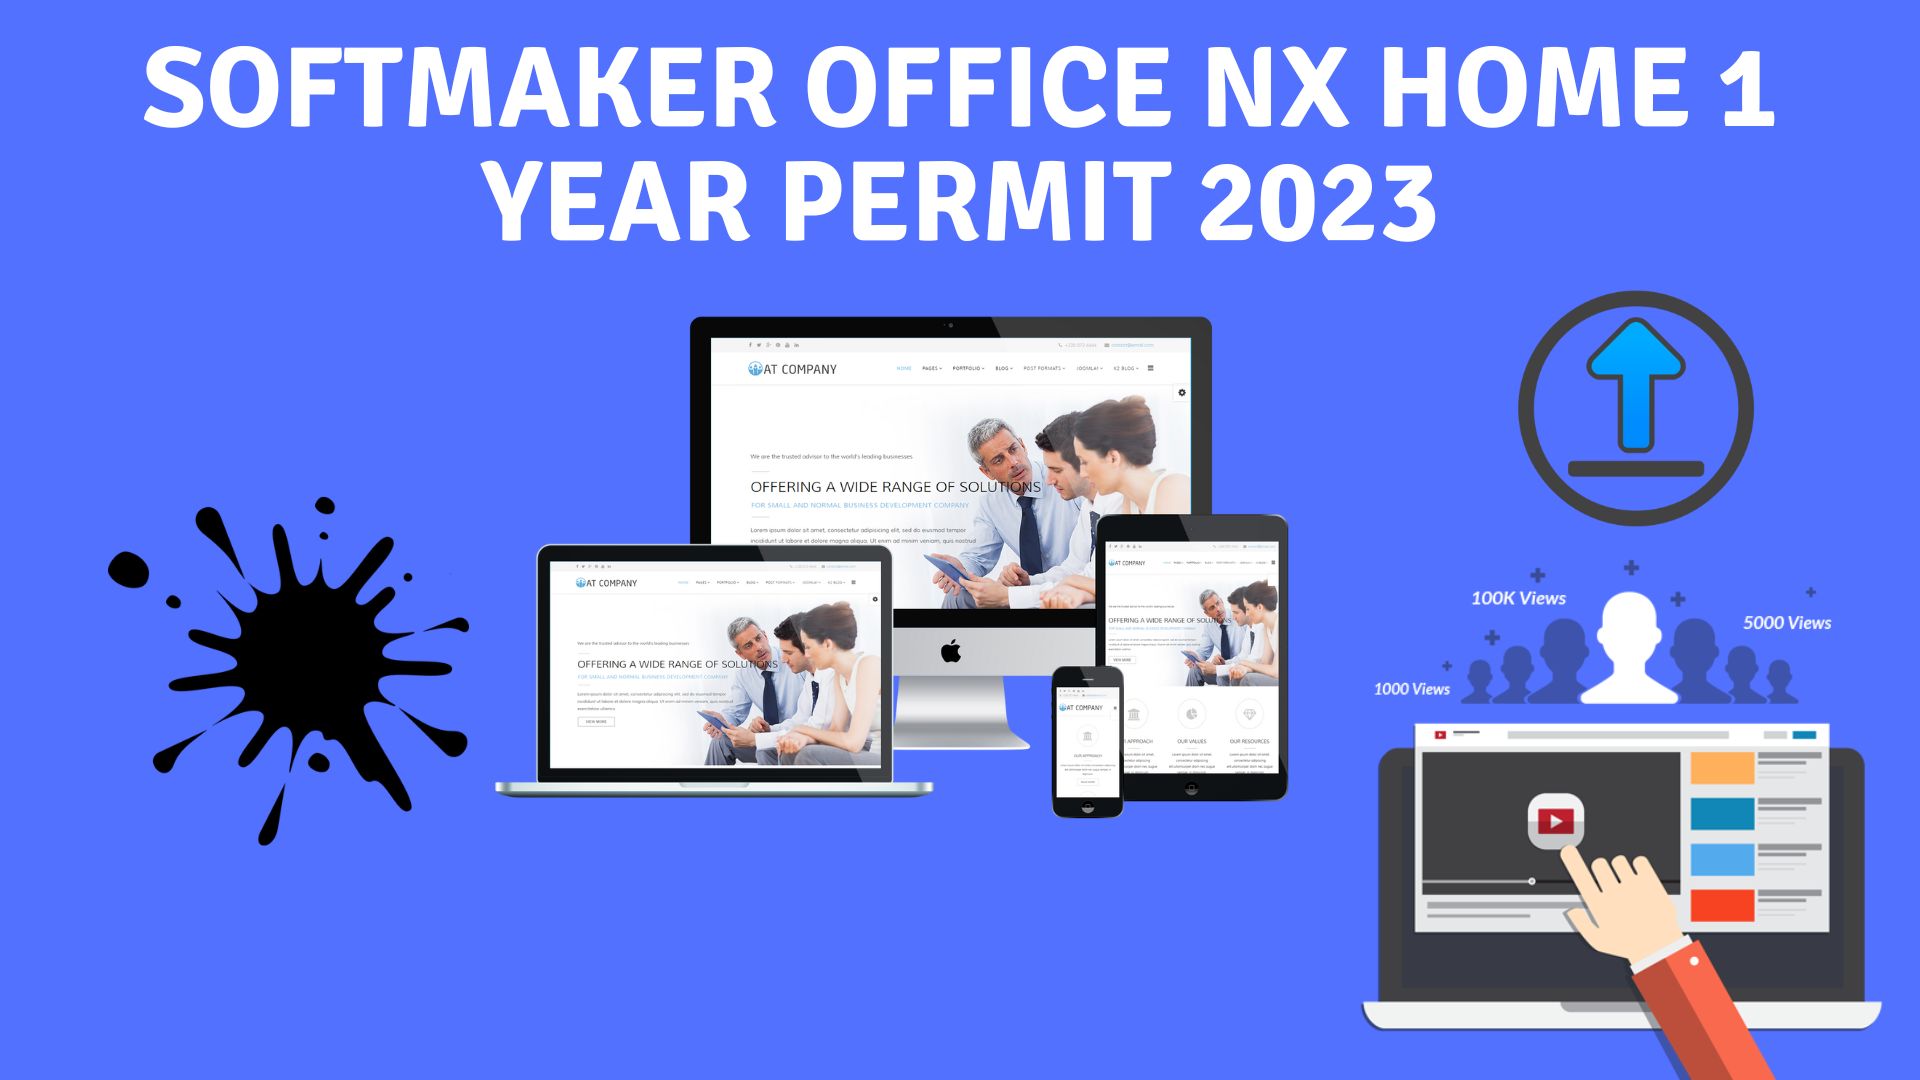 Softmaker office nx home 1 year permit 2023